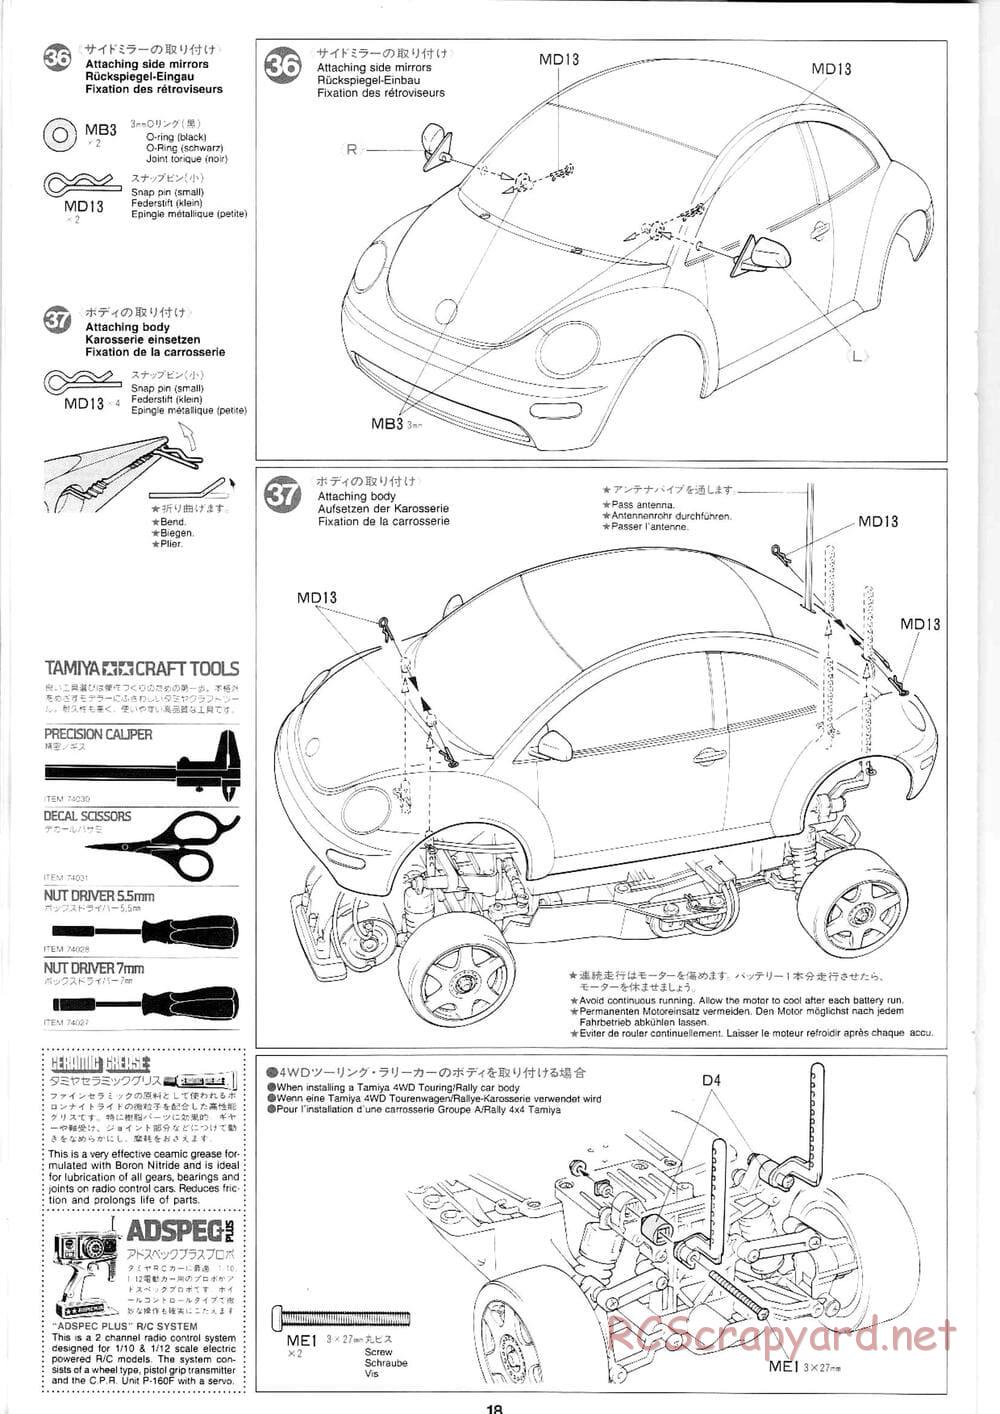 Tamiya - Volkswagen New Beetle - FF-01 Chassis - Manual - Page 16